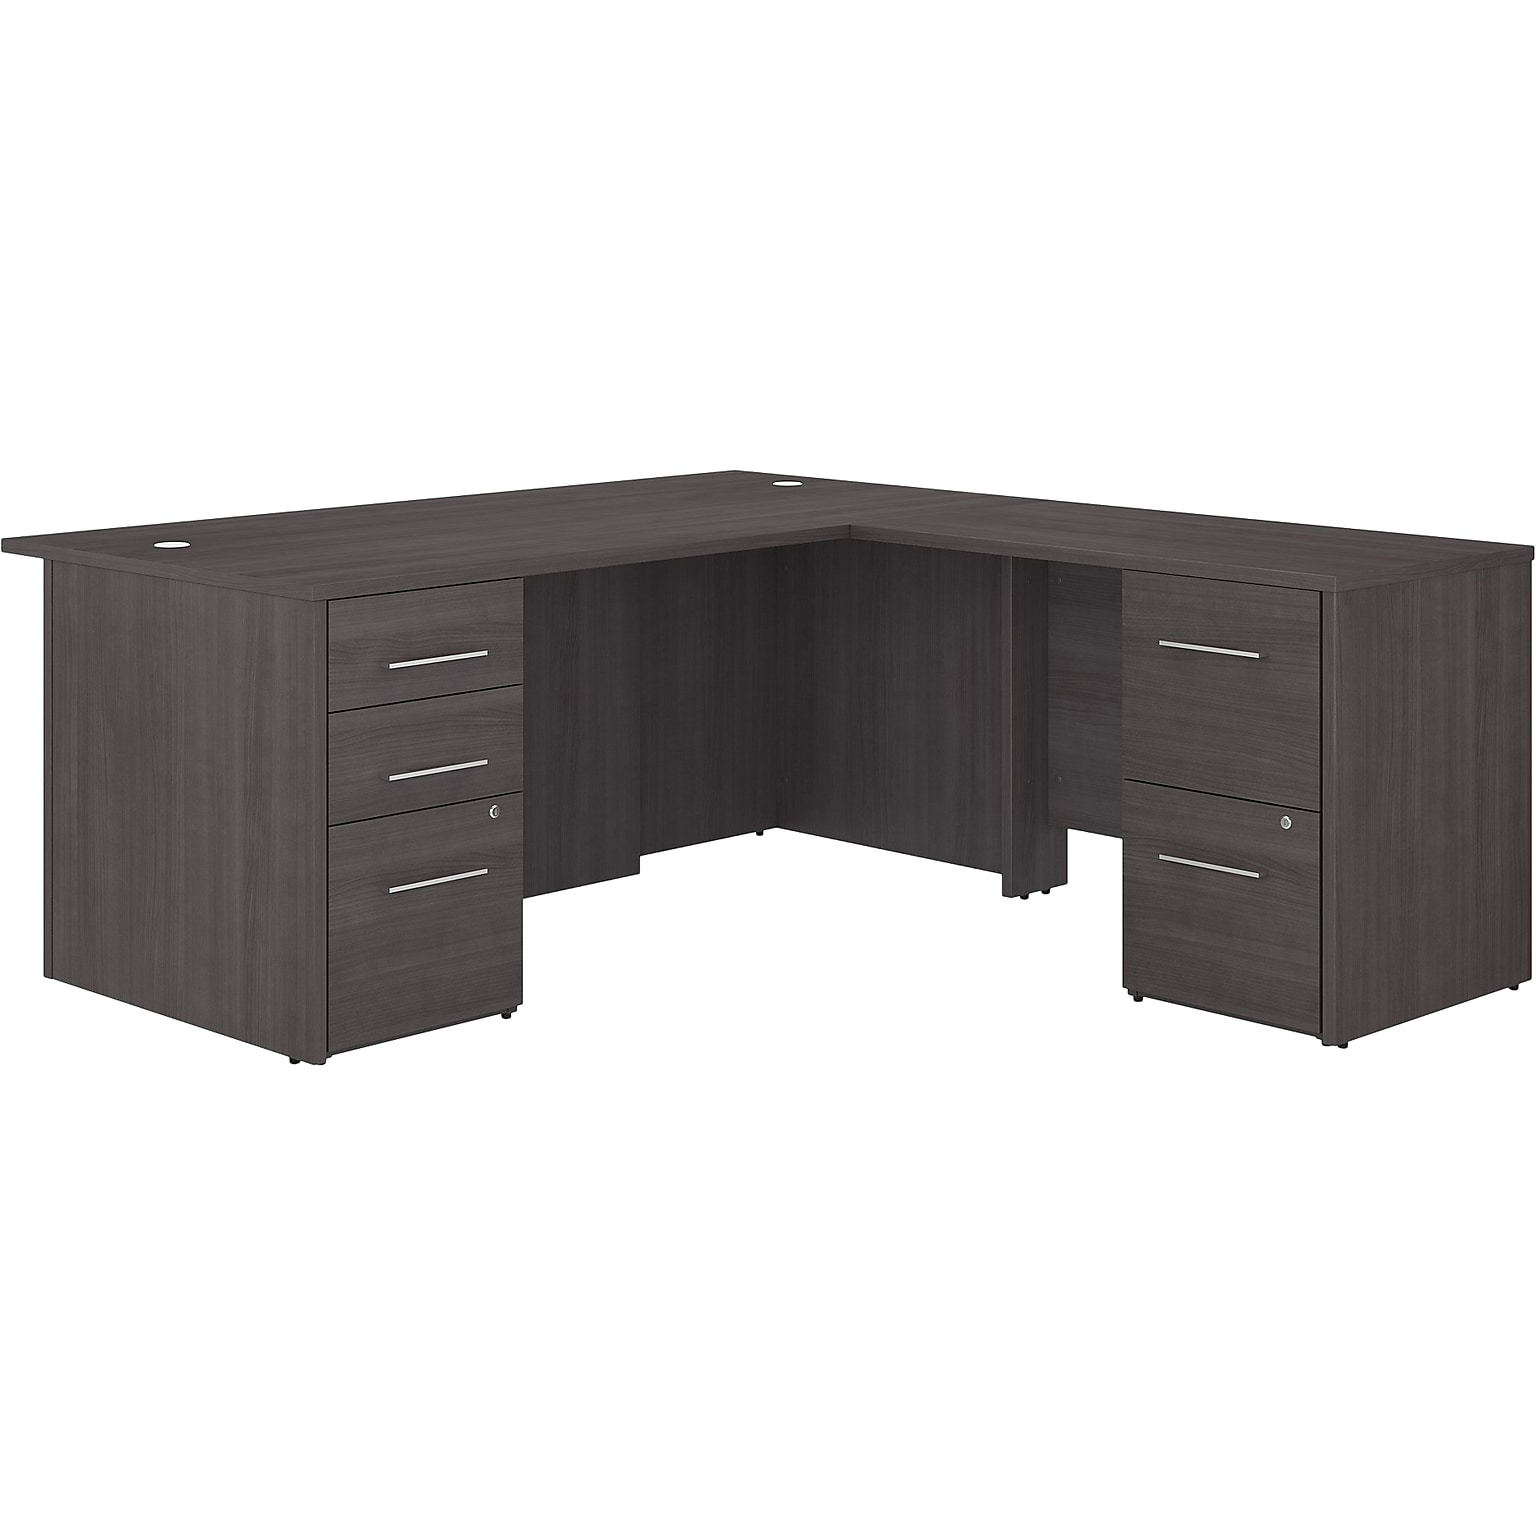 Bush Business Furniture Office 500 72W L Shaped Executive Desk with Drawers, Storm Gray (OF5004SGSU)